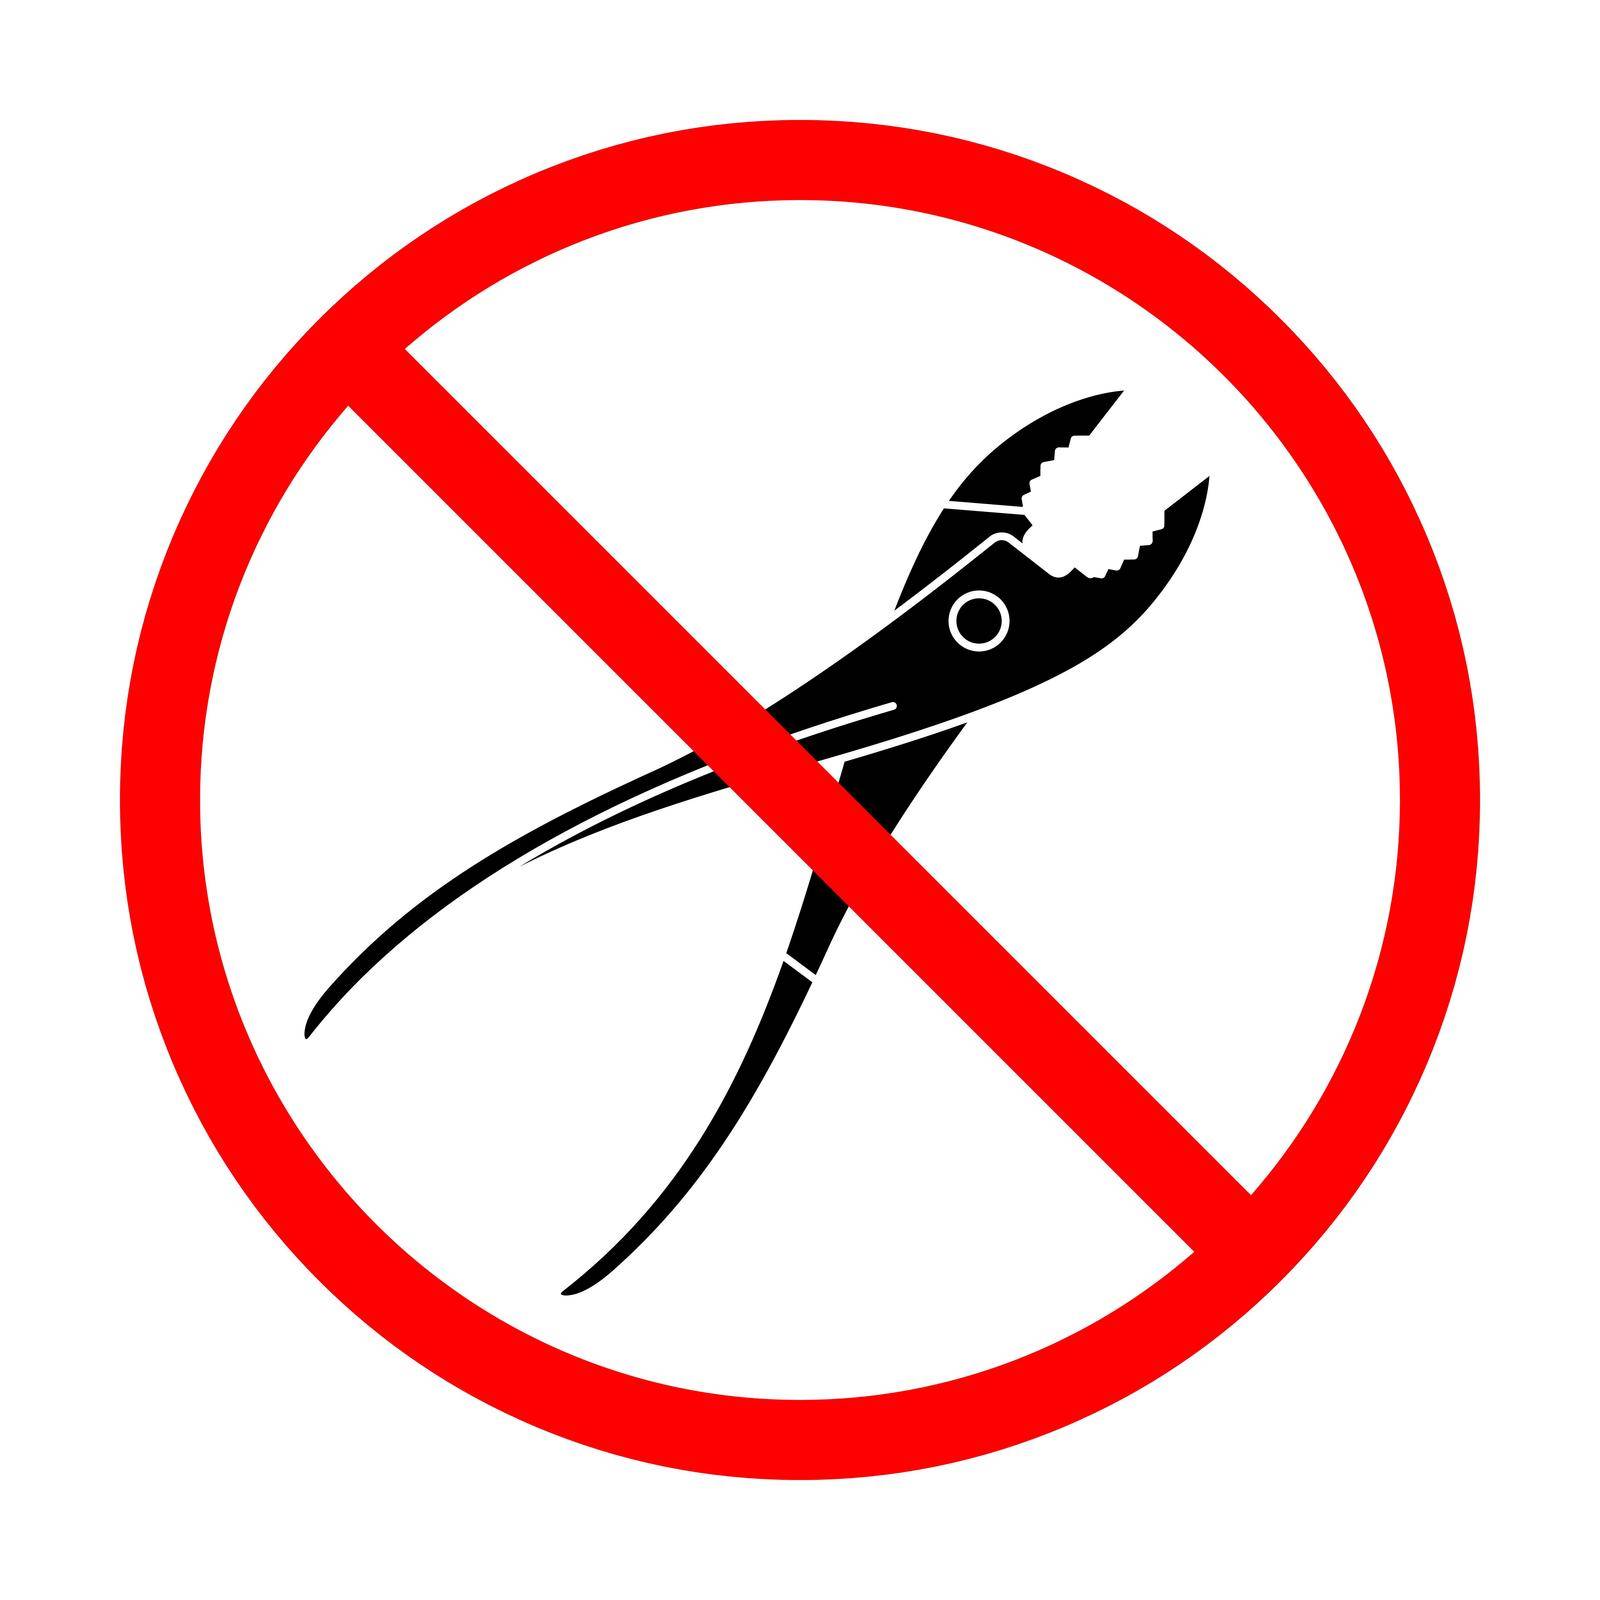 Pliers ban sign. Pliers is forbidden. Prohibited sign of Pliers. Red prohibition sign. Vector illustration